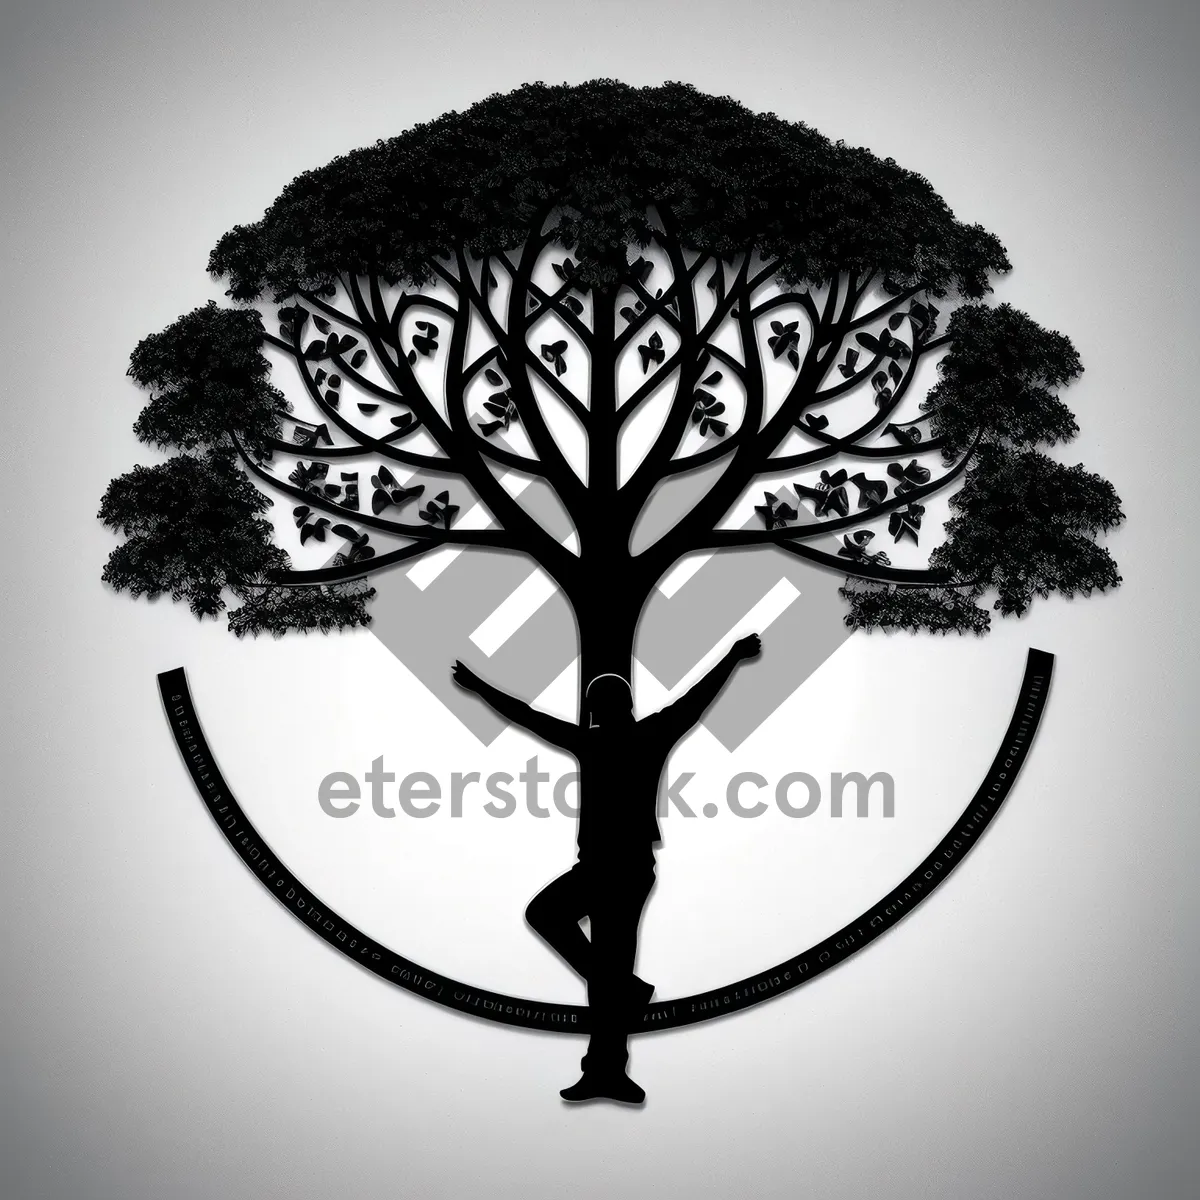 Picture of Silhouette of Tree Branch with Floral Chandelier Design